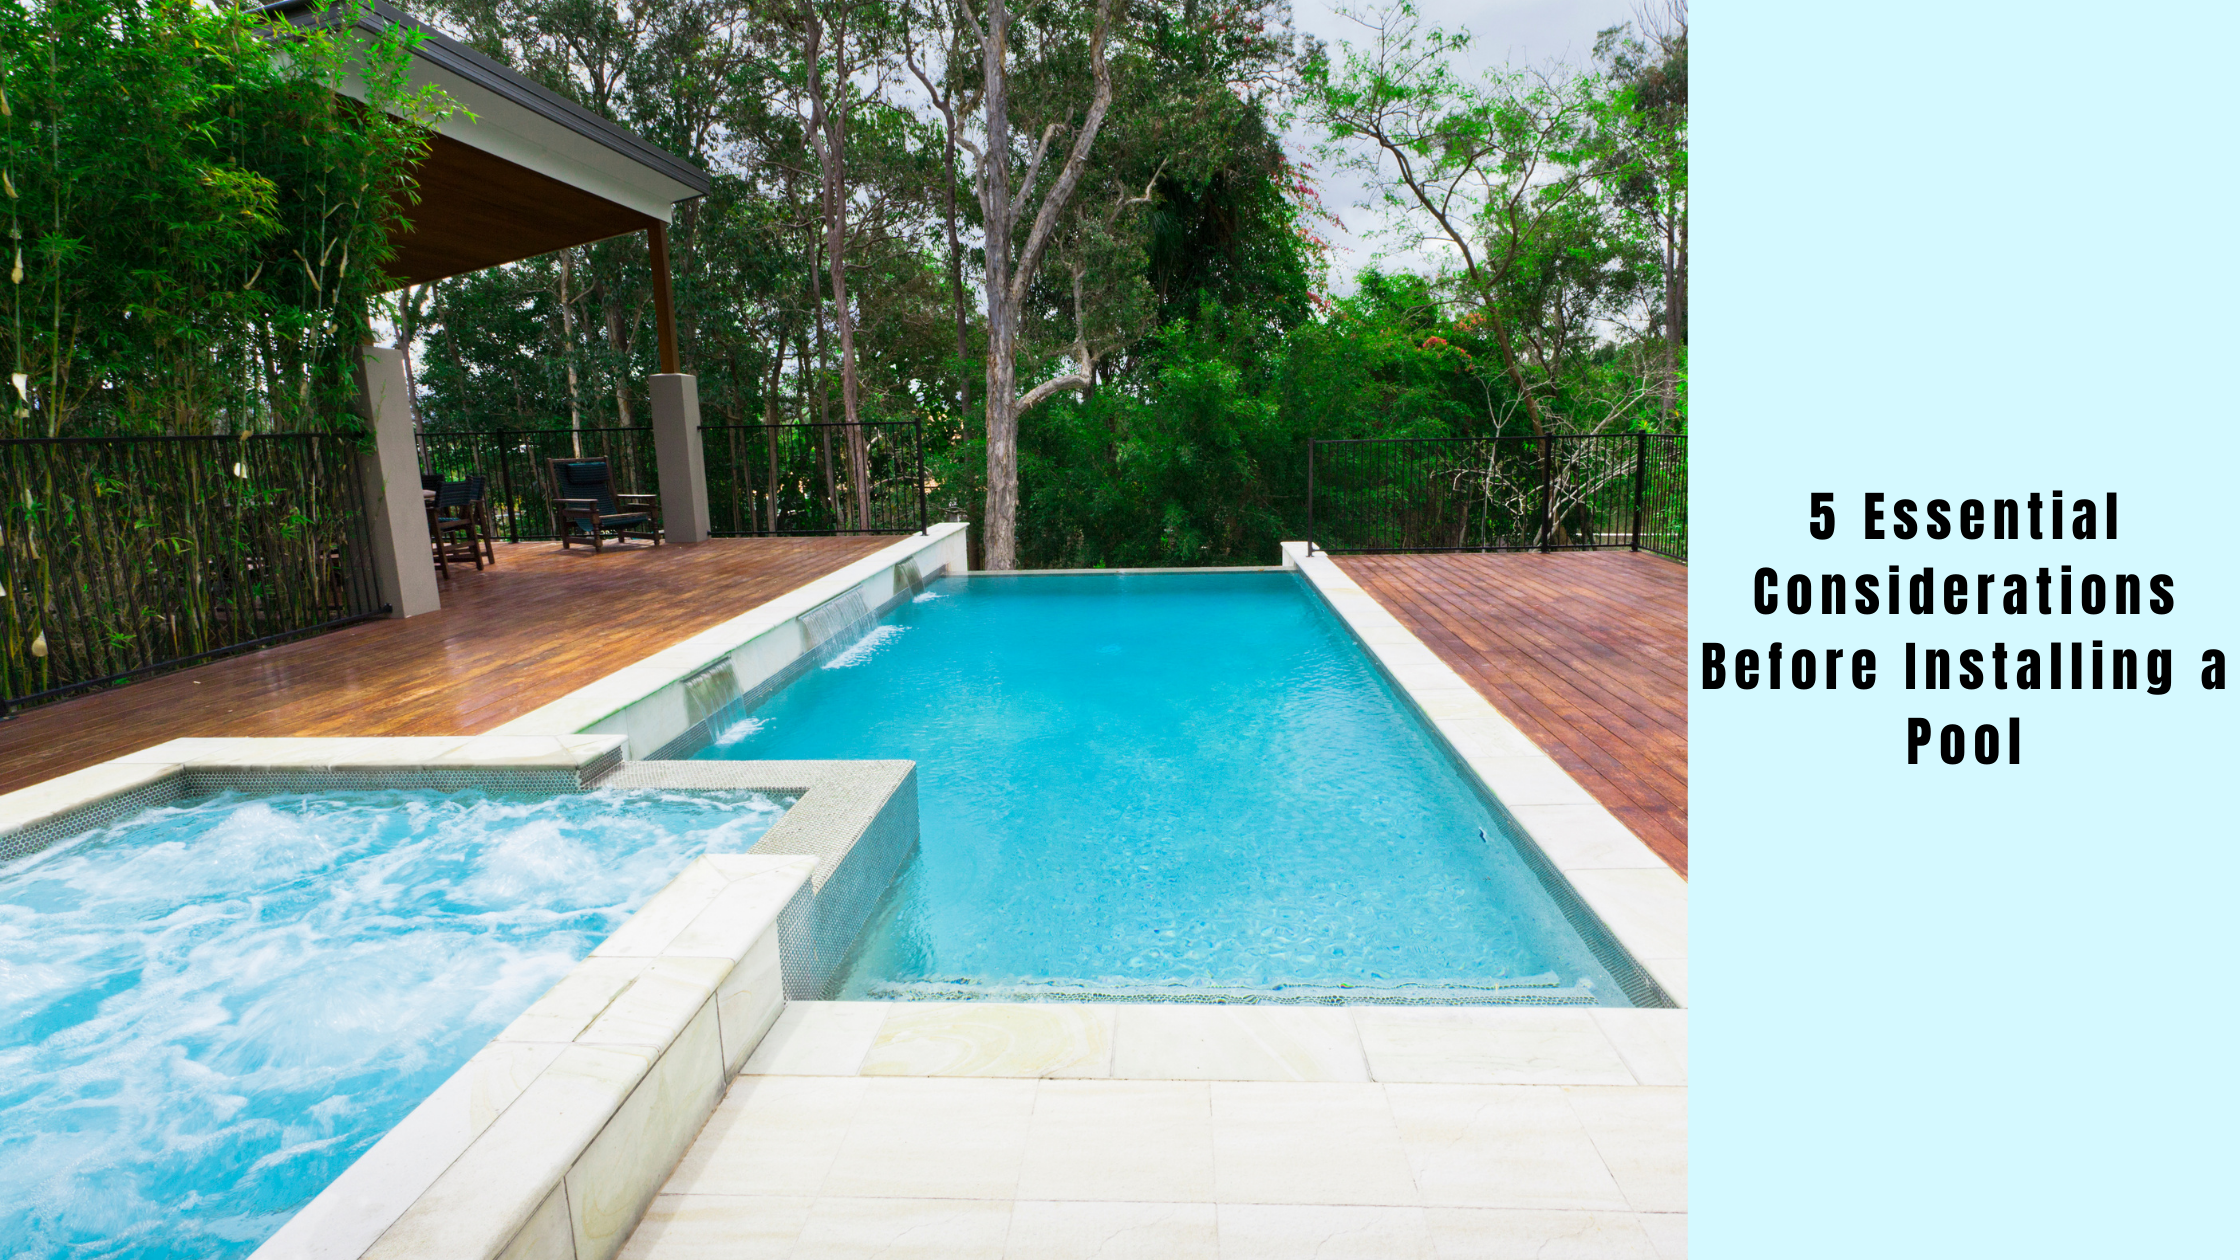 5 considerations before installing a pool